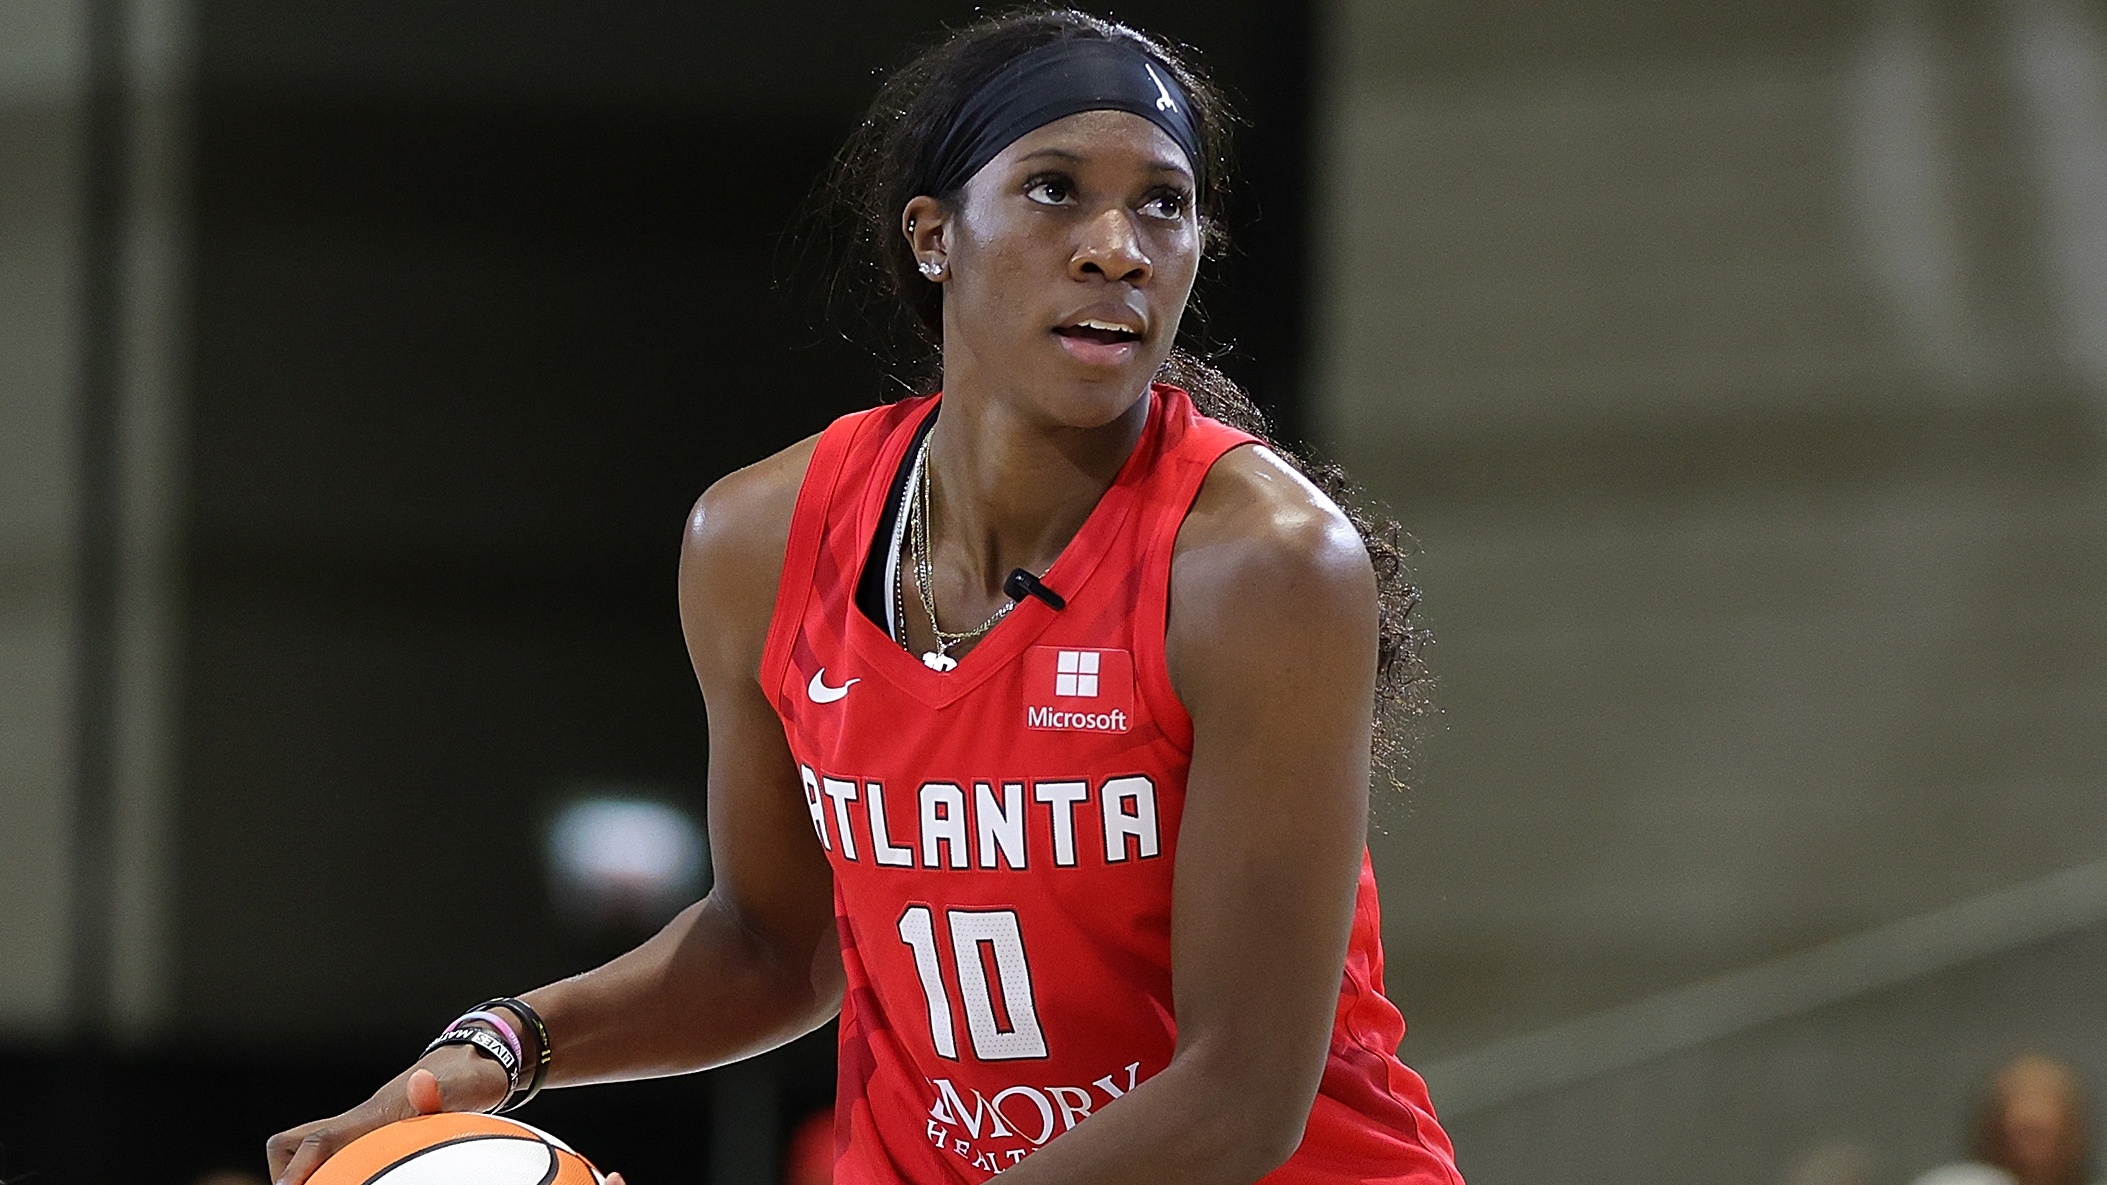 WNBA Rookie Rhyne Howard Wants Young Black Girls In Sports To Feel ‘Invited To Play’